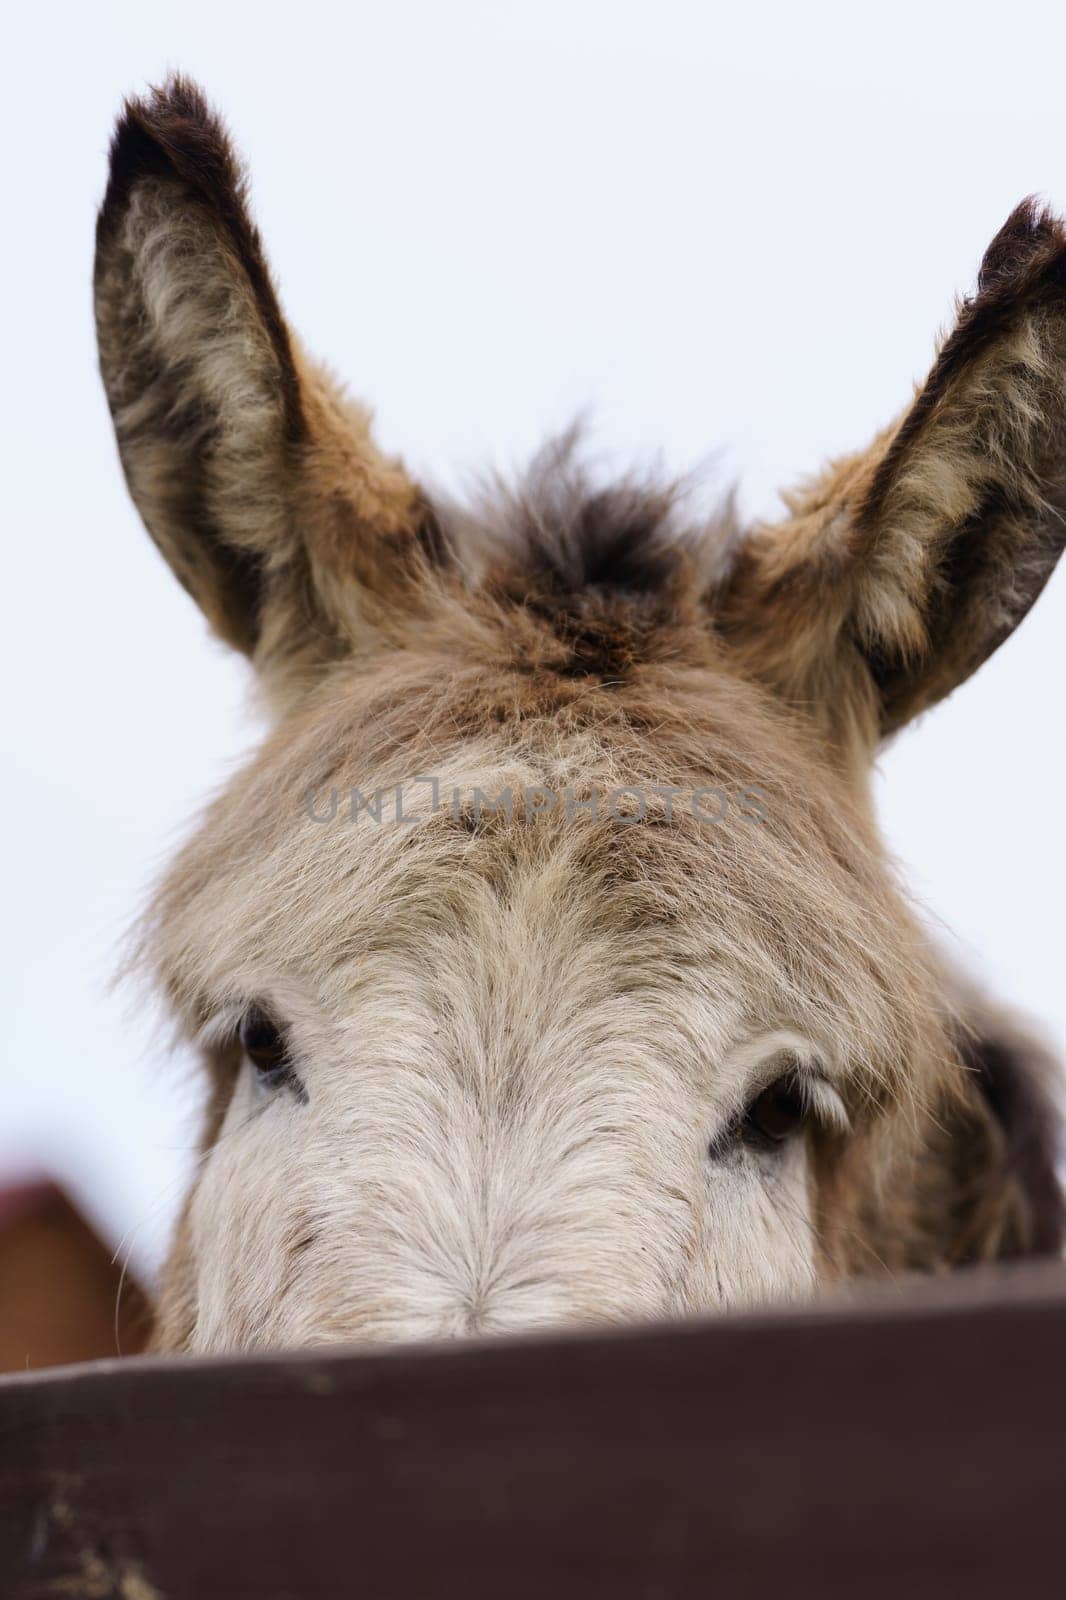 Donkey up close in a spacious pen, peacefully grazing, surrounded by wooden fencing. Vertical photo by darksoul72